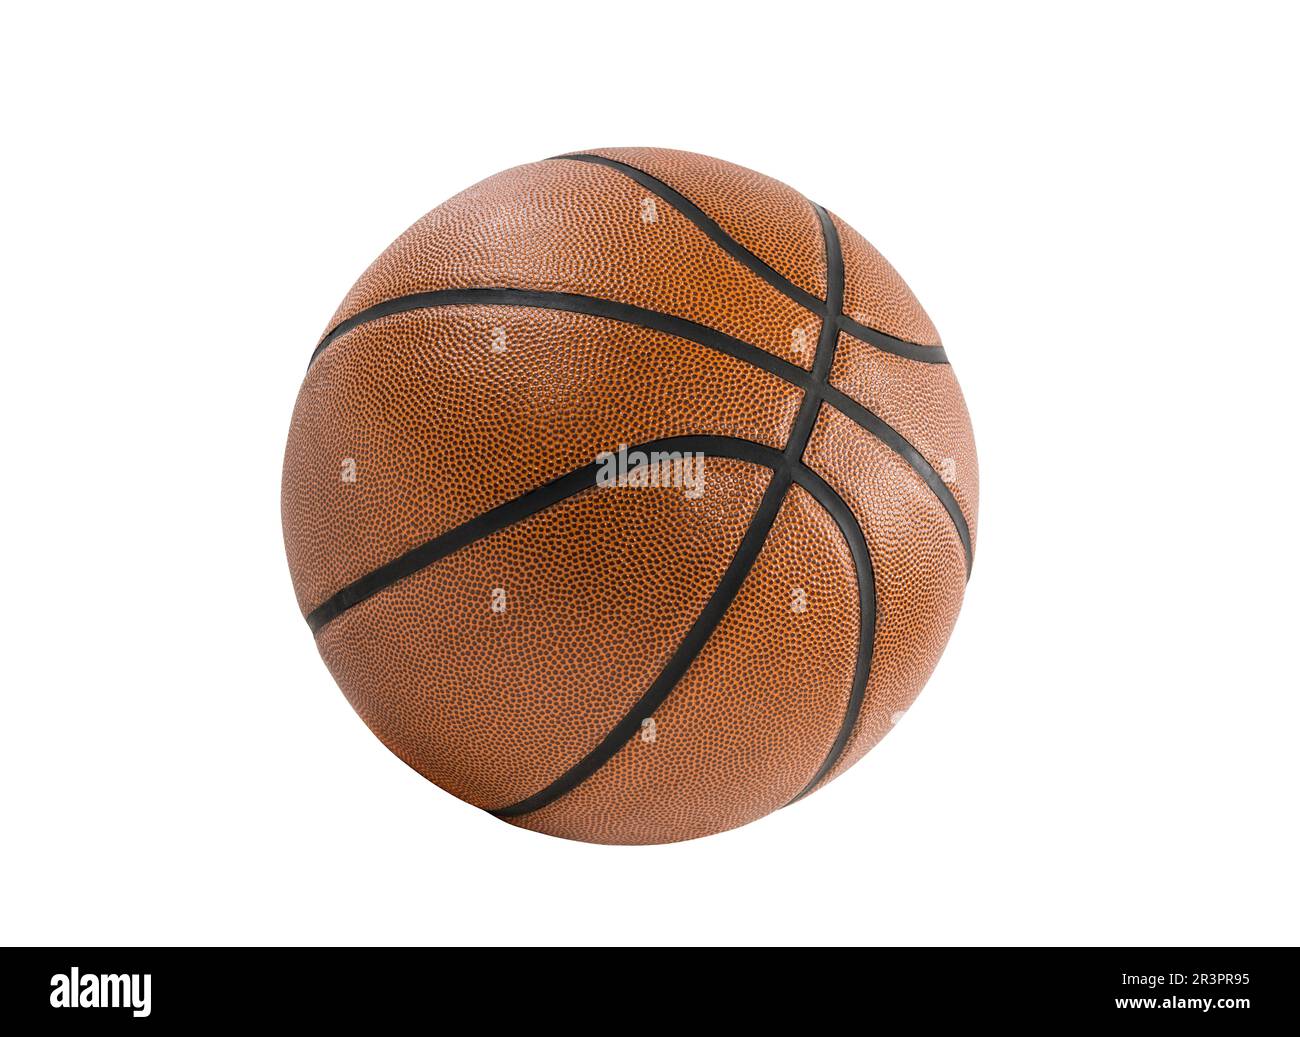 Basketball isolated with cut out background. Stock Photo